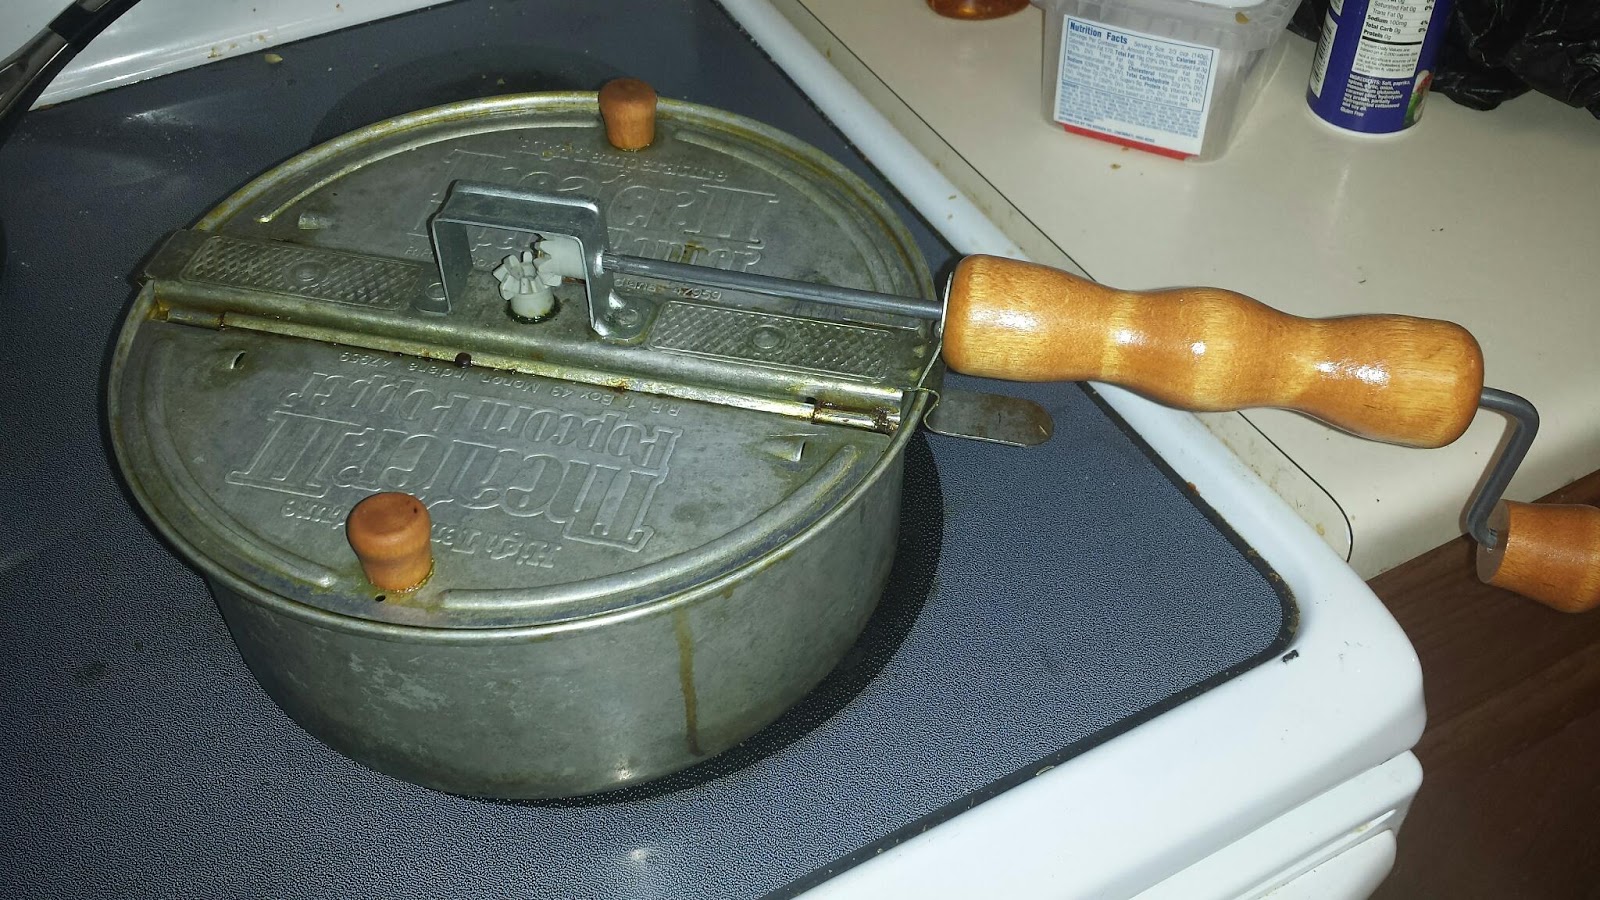 35 People Who Live With Real Life MacGyver